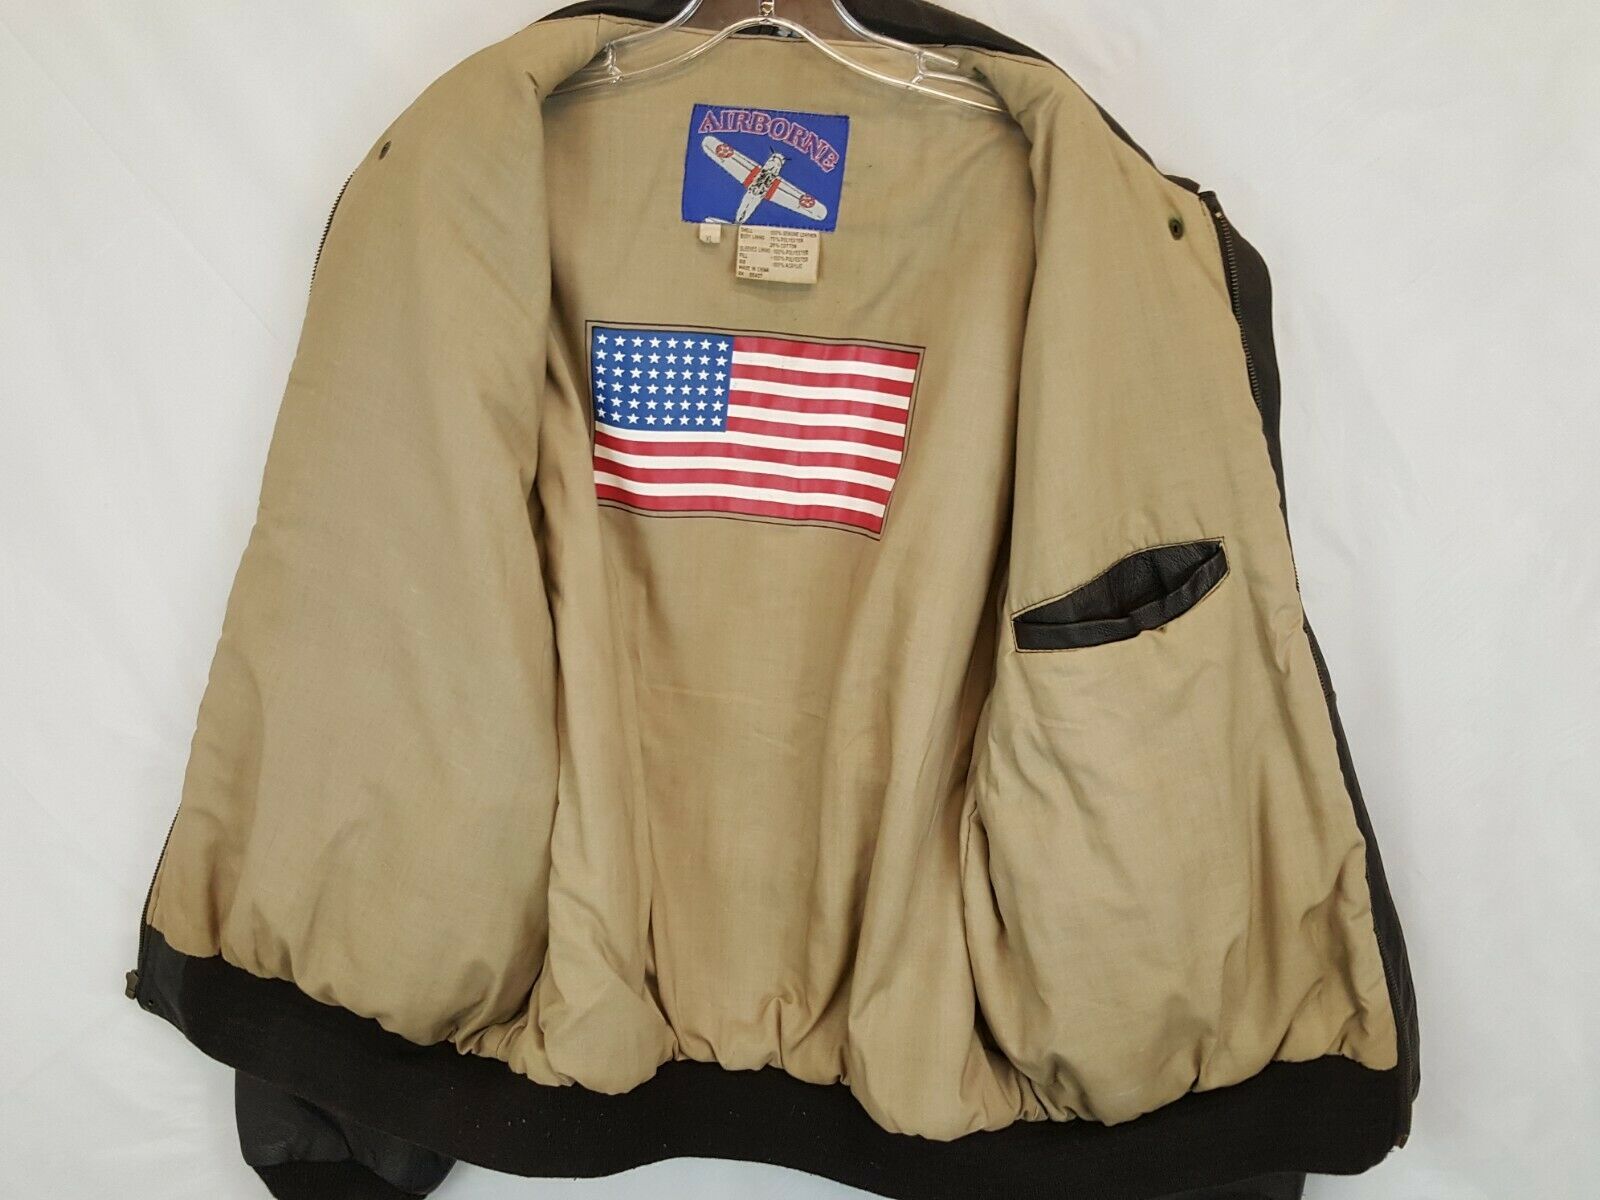 Our Miss Fortune B17 Bomber Airborne Leather Flight Jacket